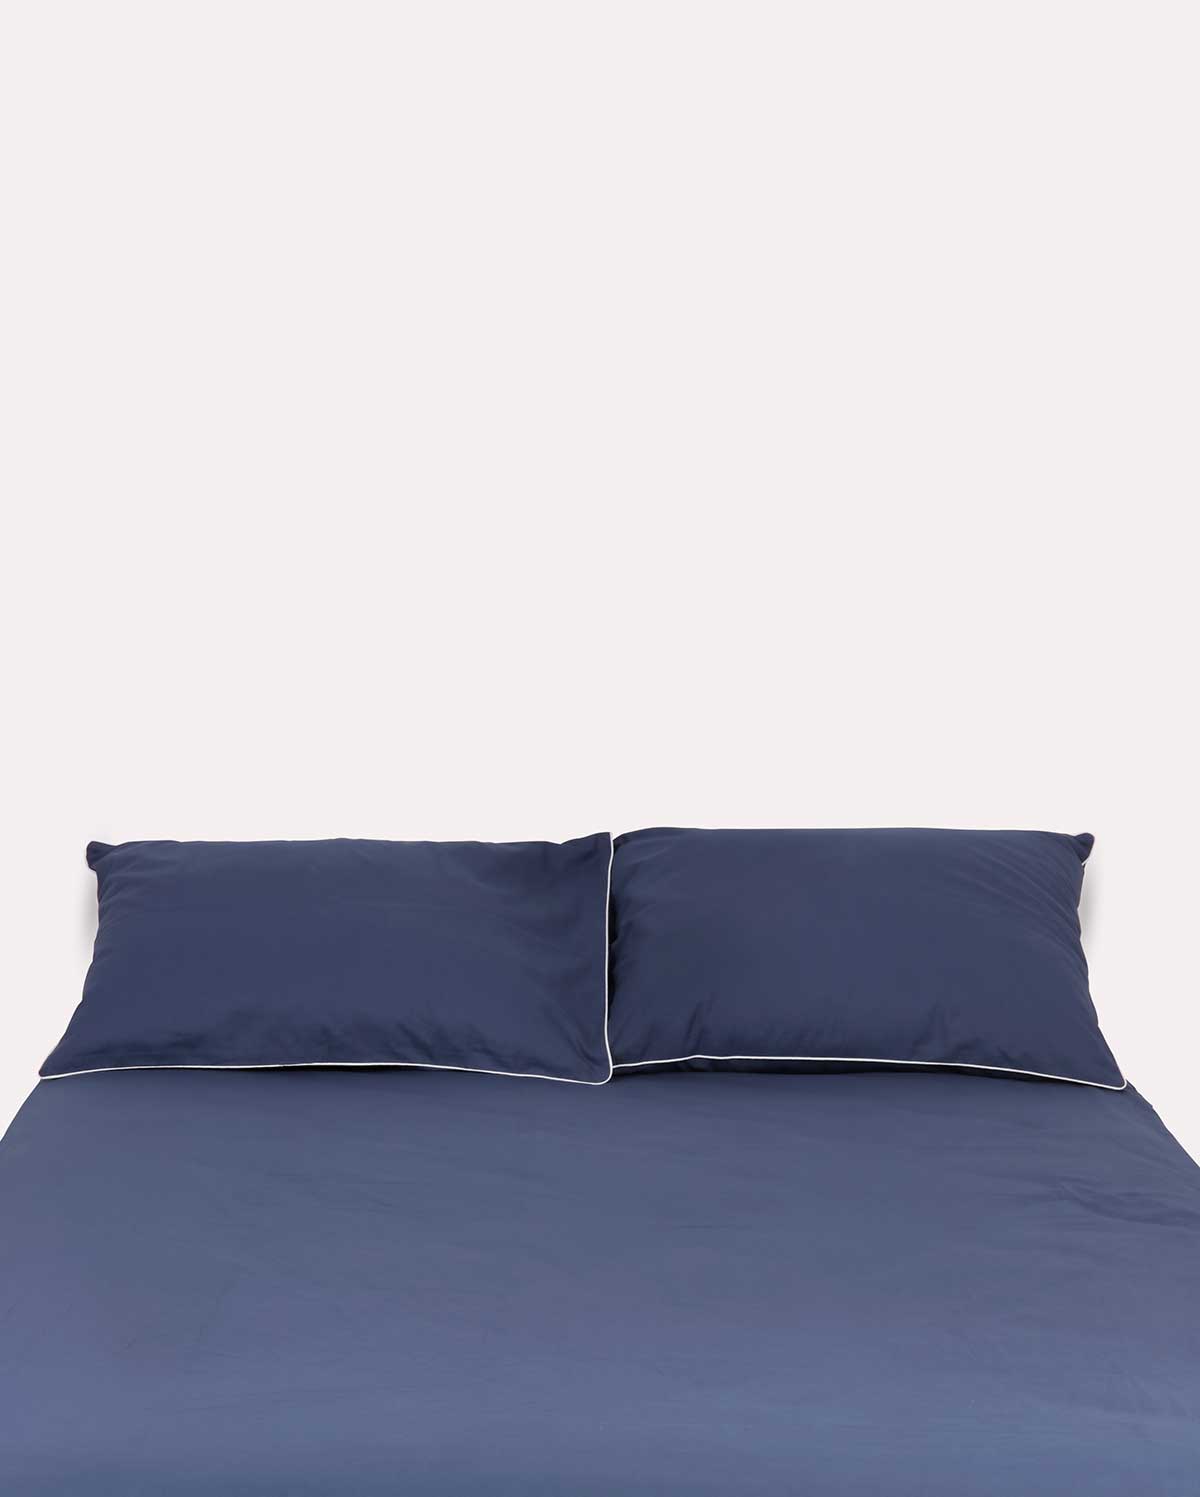 Classic Percale - Fitted Sheet Set- Navy Blue with White Piped Edge